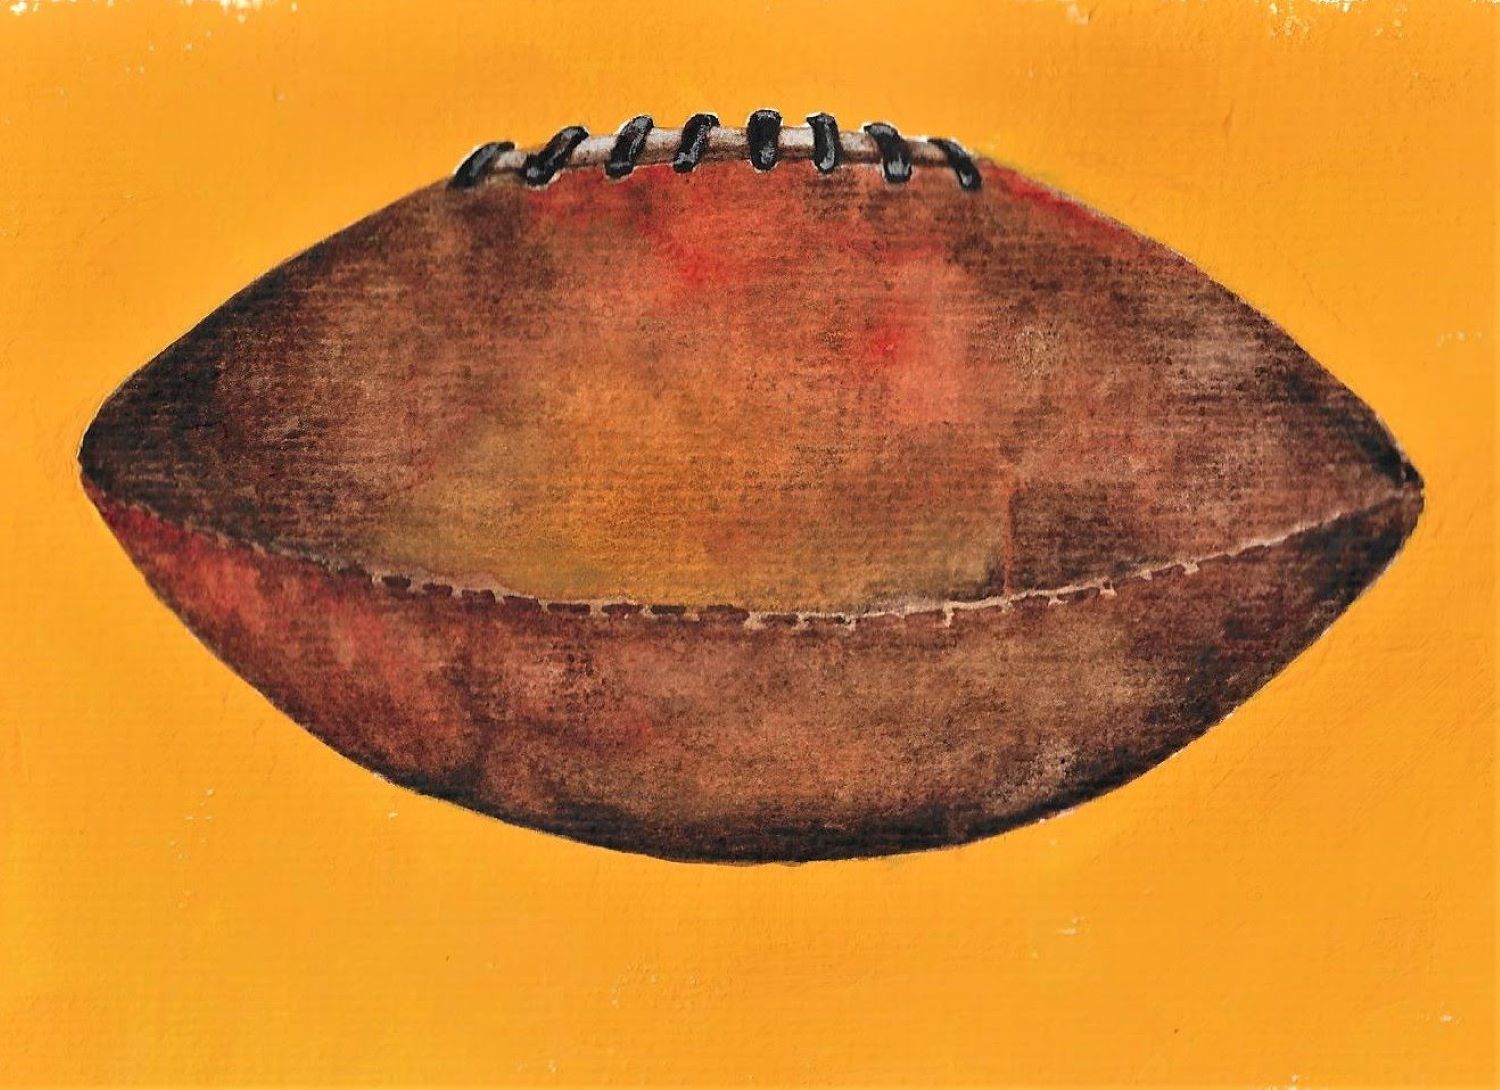 Football watercolor painting on paper